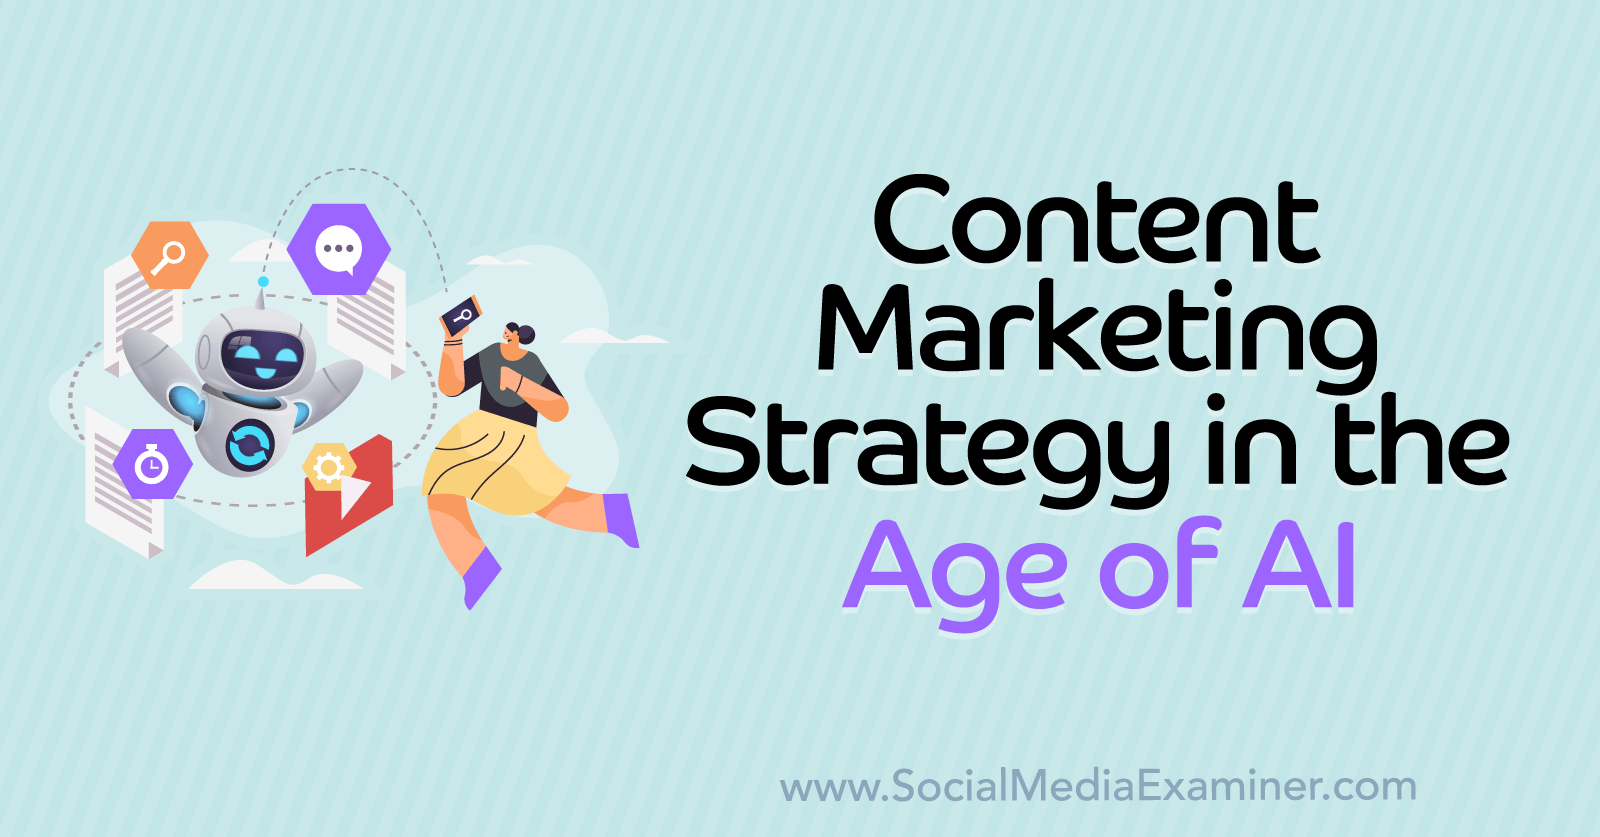 Content Marketing Strategy in the Age of AI by Social Media Examiner